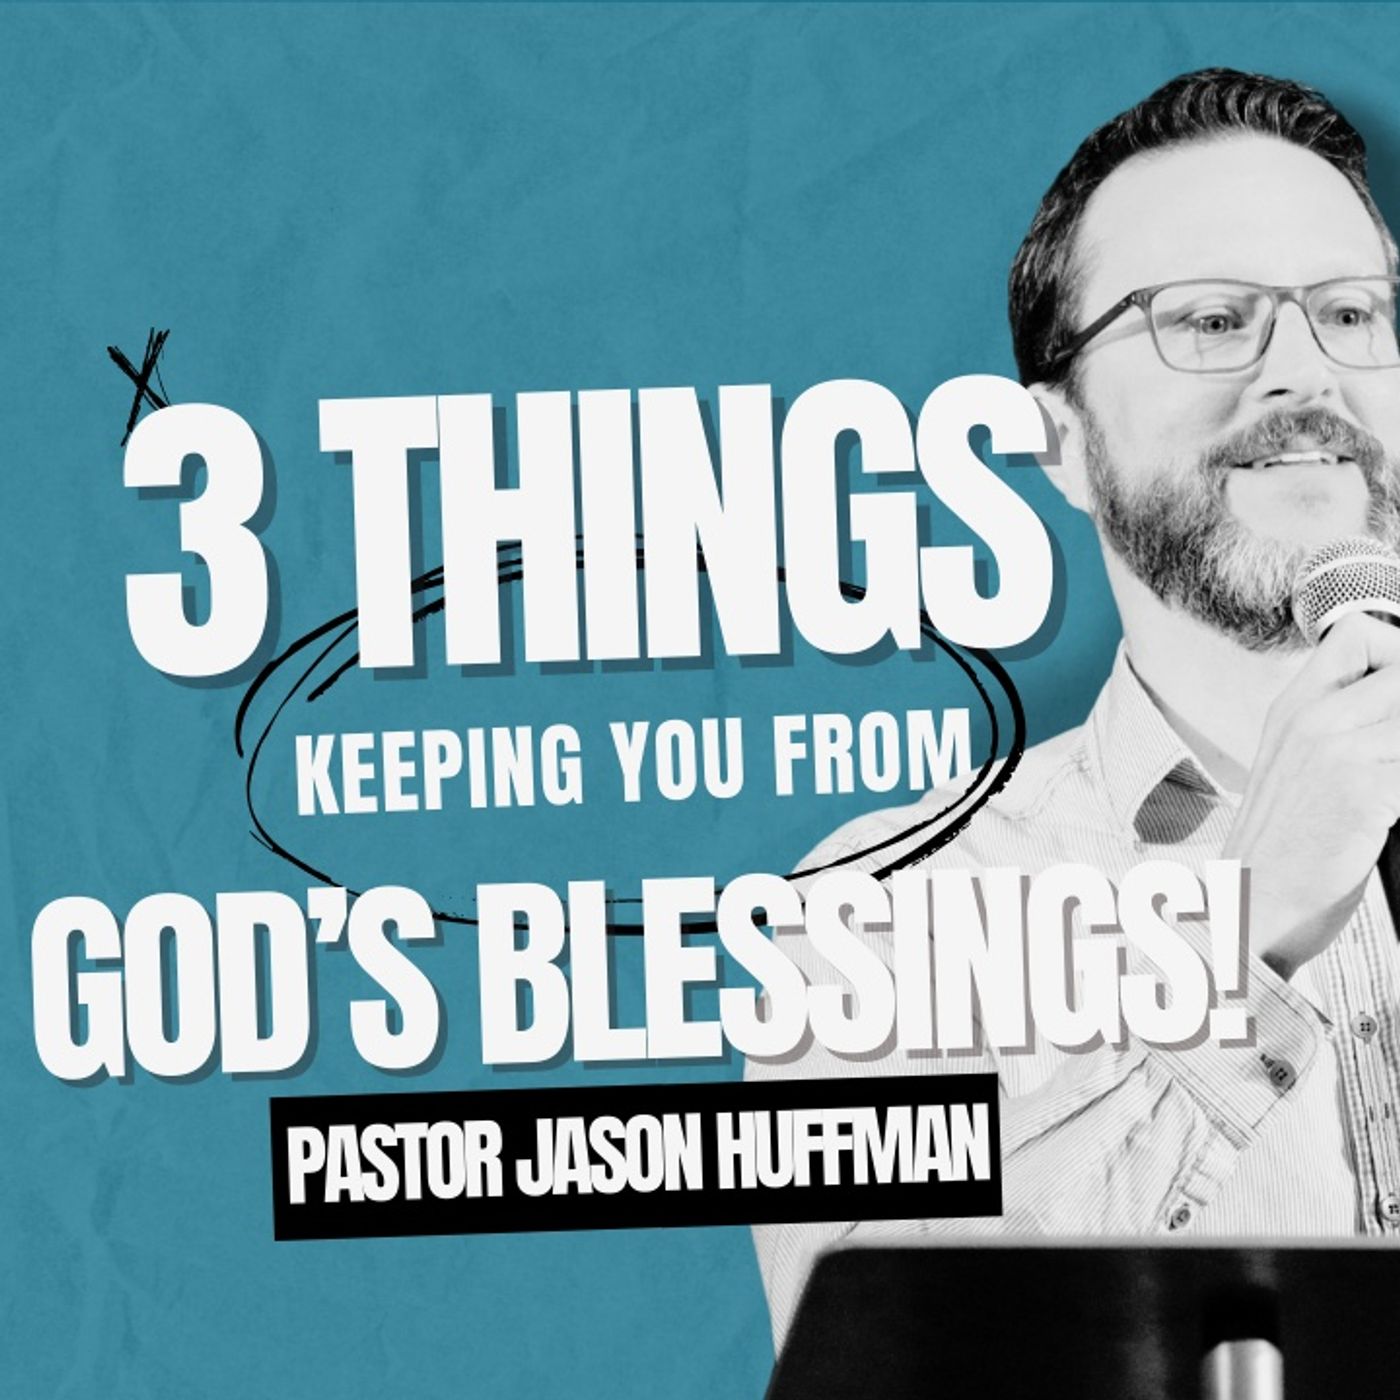 "3 Things Keeping You From God's Blessings!" with Pastor Jason Huffman